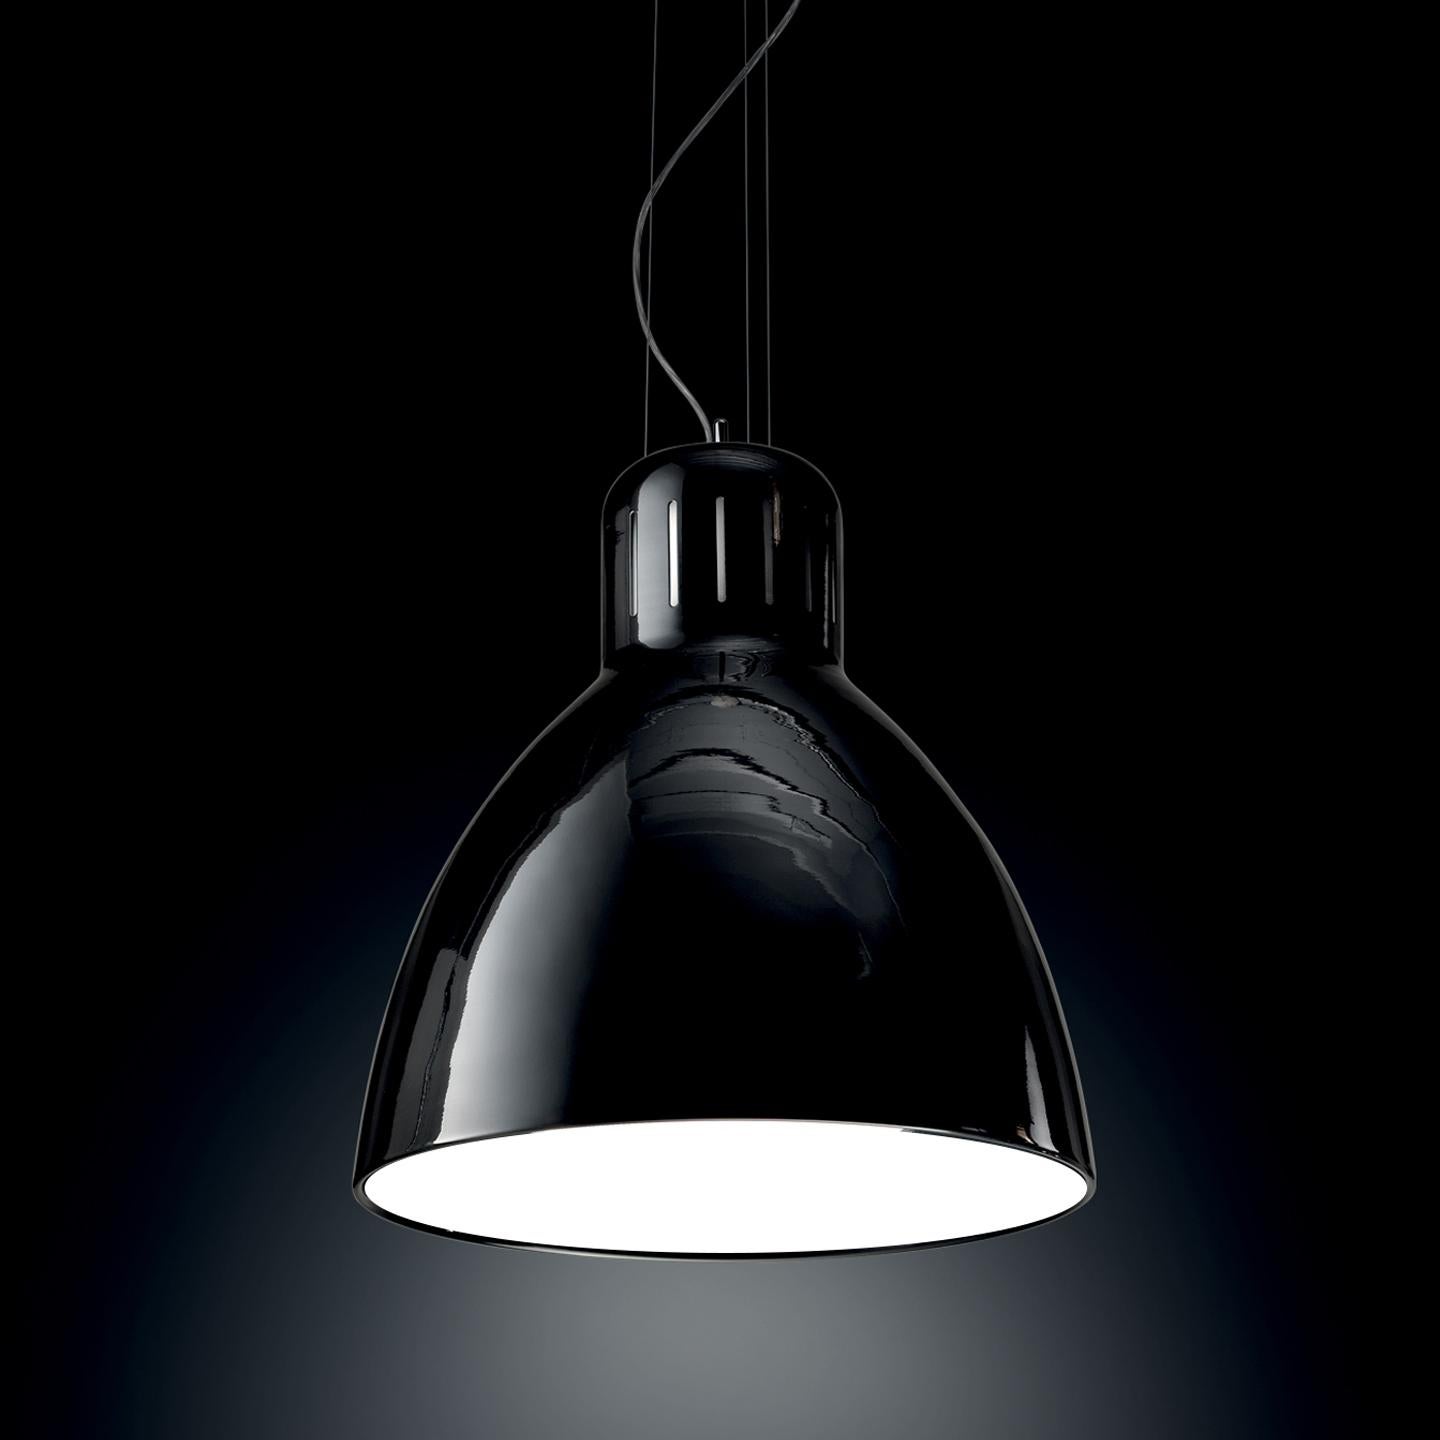 The Great JJ pendant updates the original Jac Jacobsen L-1 architect desk lamp (1937) for contemporary use. The 2006 refresh of this iconic design is a clever play on scale and light topology (creating a large-scale pendant from a small-scale task